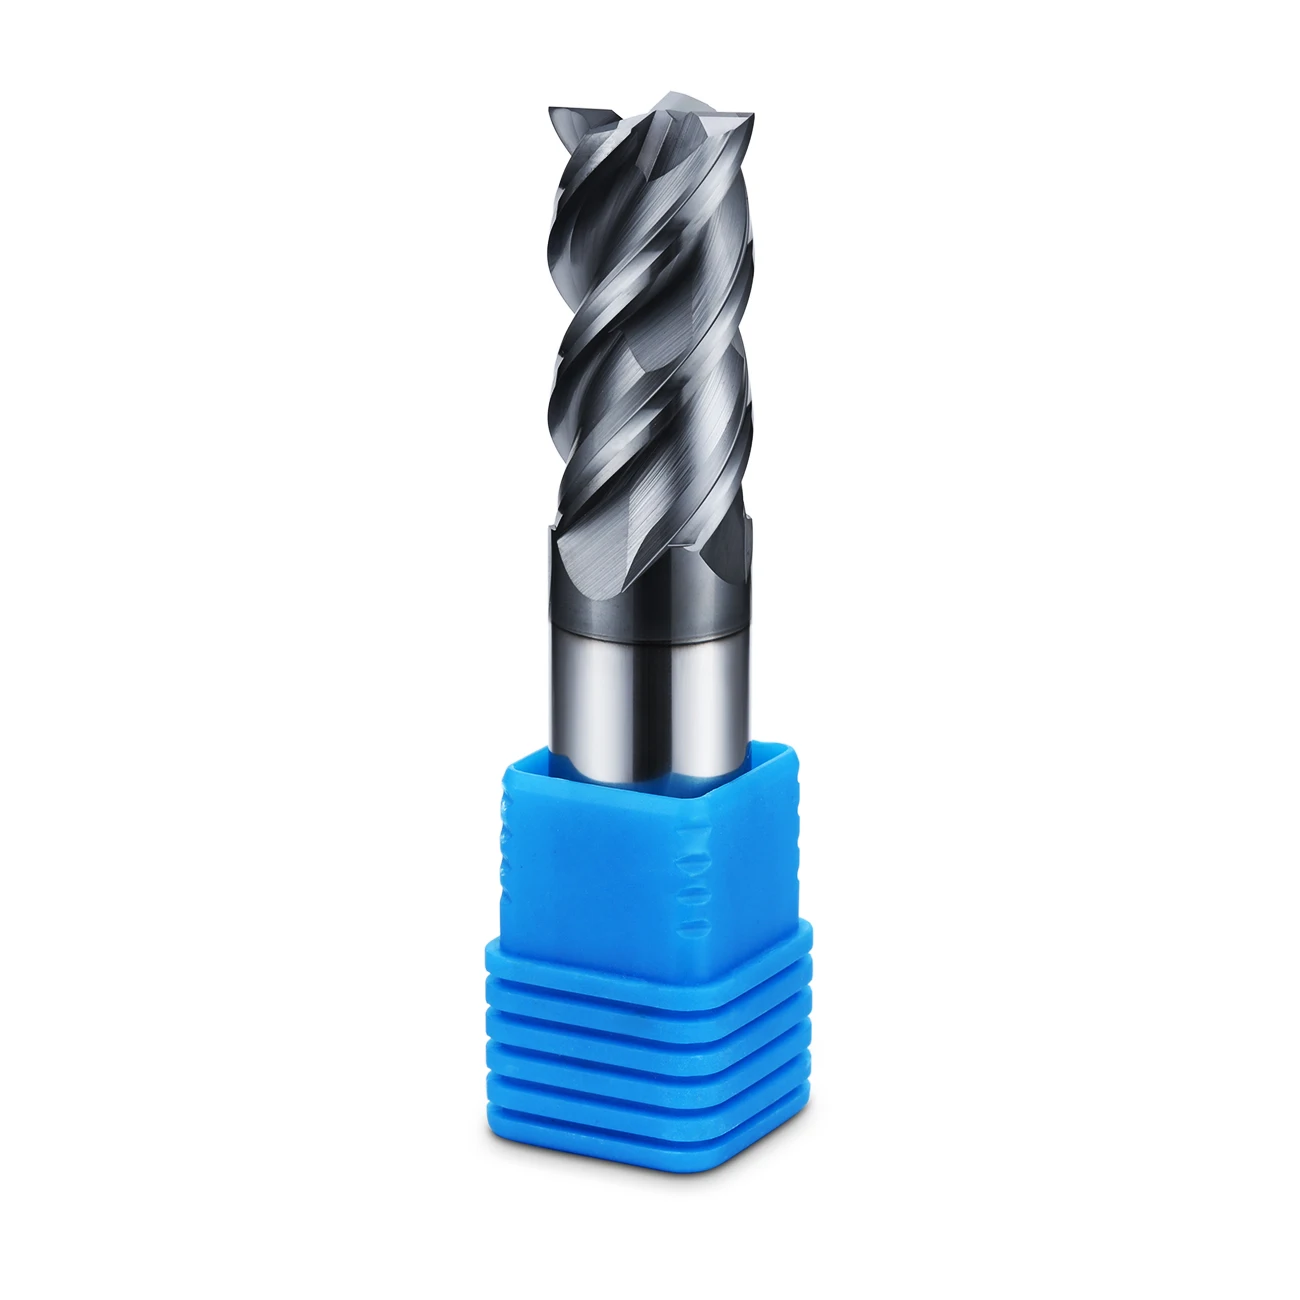 Milling tool END MILL D16 Stainless Steel Cast Iron 